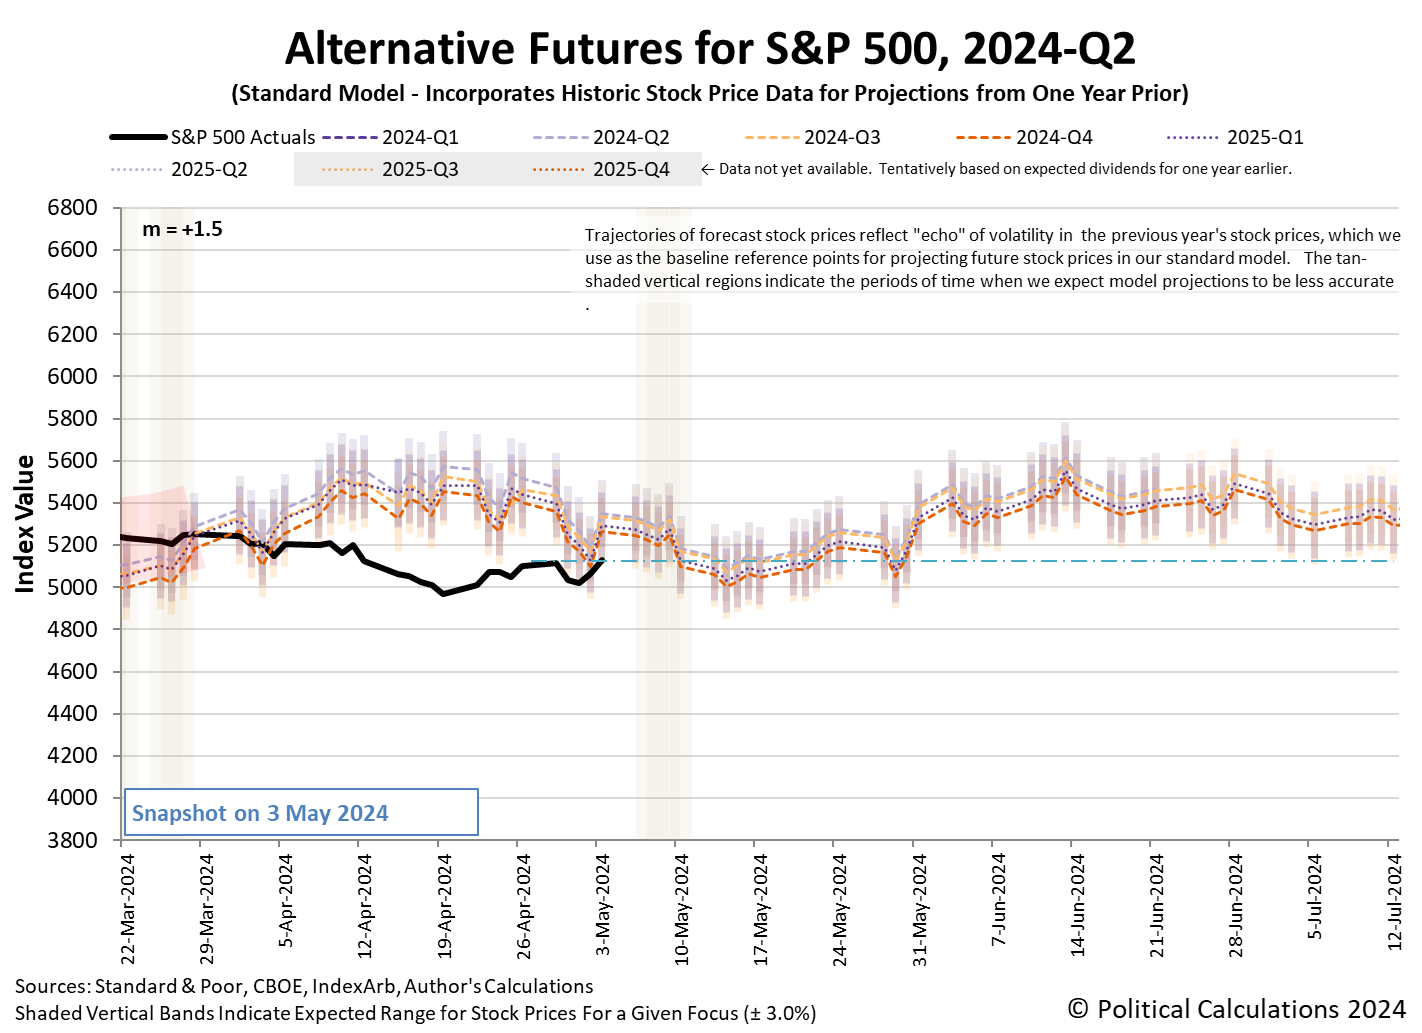 Alternative Futures - S&P 500 - 2024Q2 - Standard Model (m=+1.5 from 9 March 2023) - Snapshot on 3 May 2024